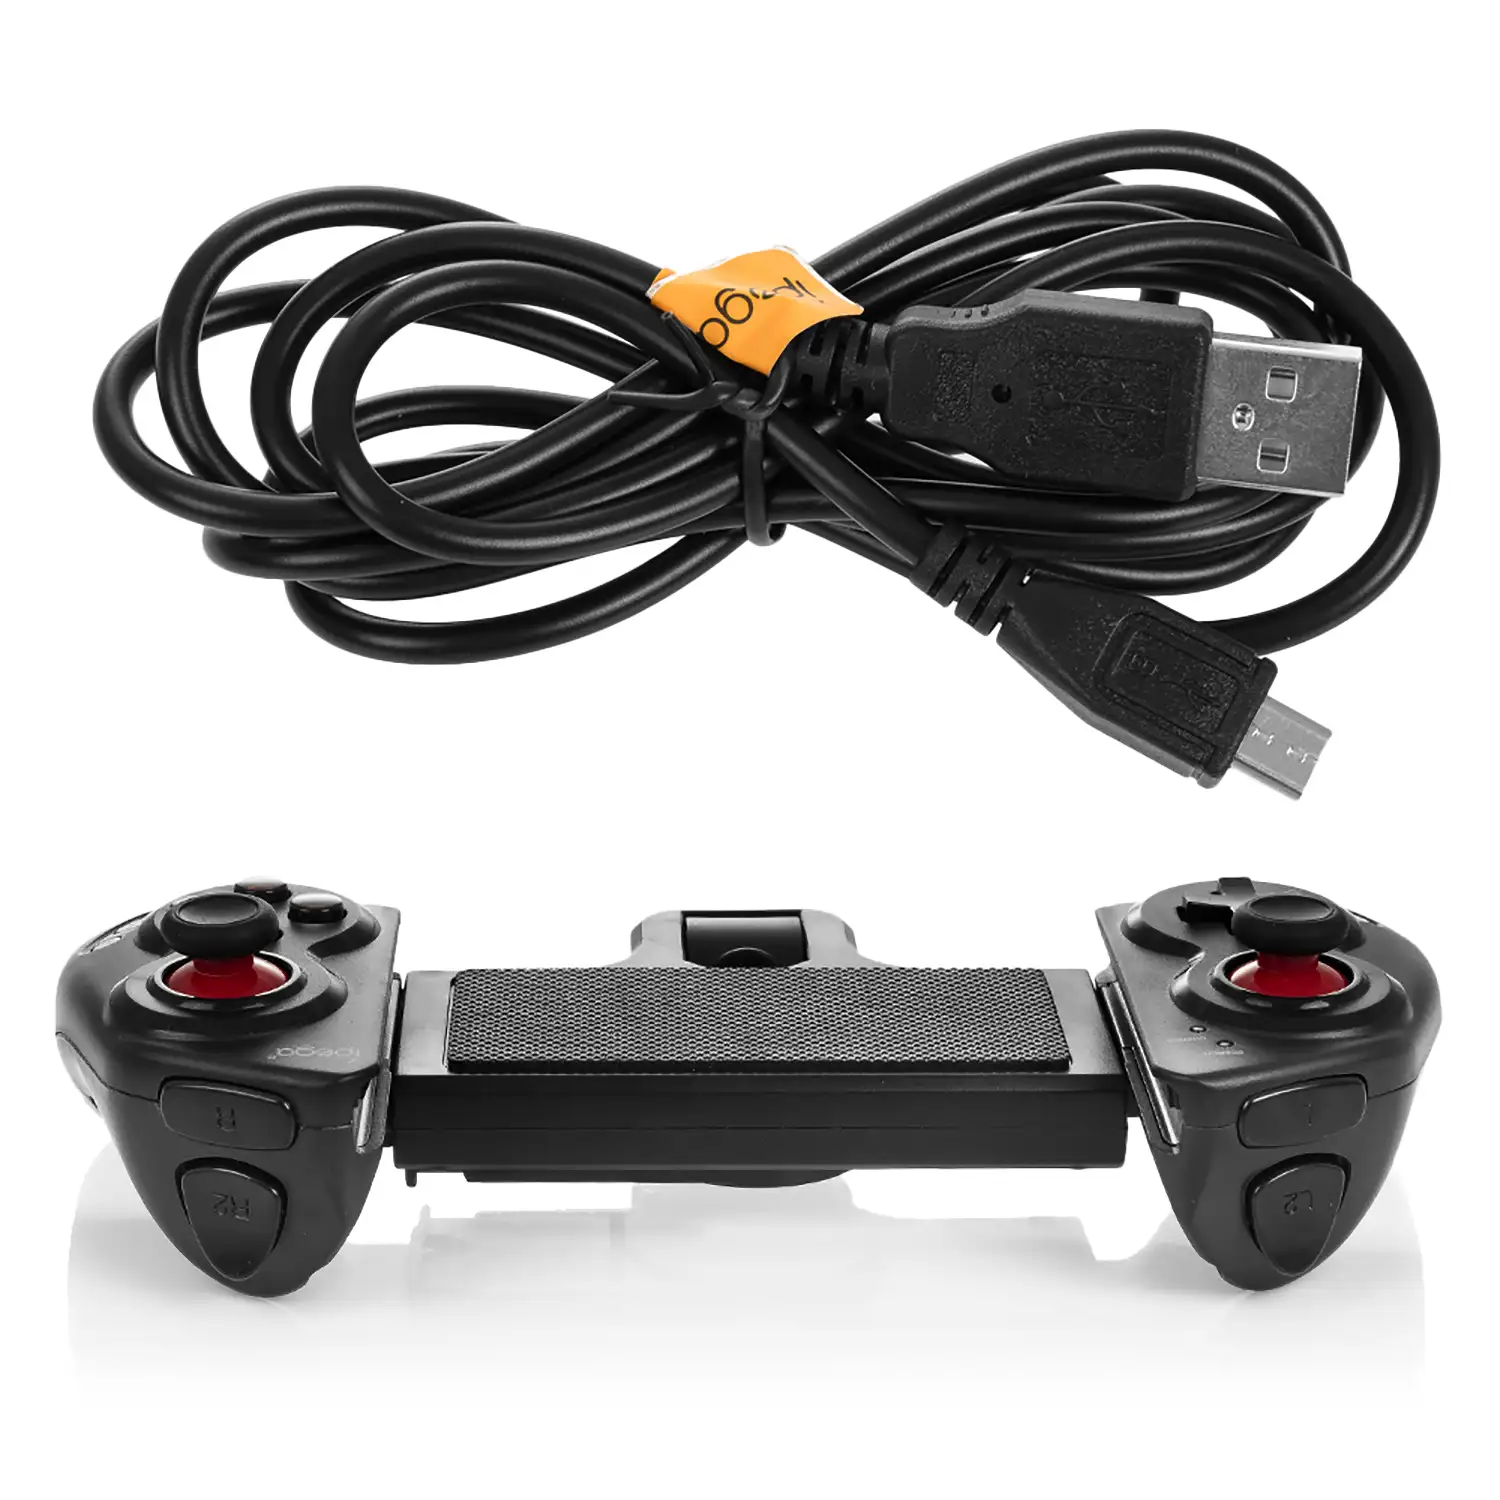 Gamepad Bluetooth extensible, con stand central, para Smartphones, Tablets y PC